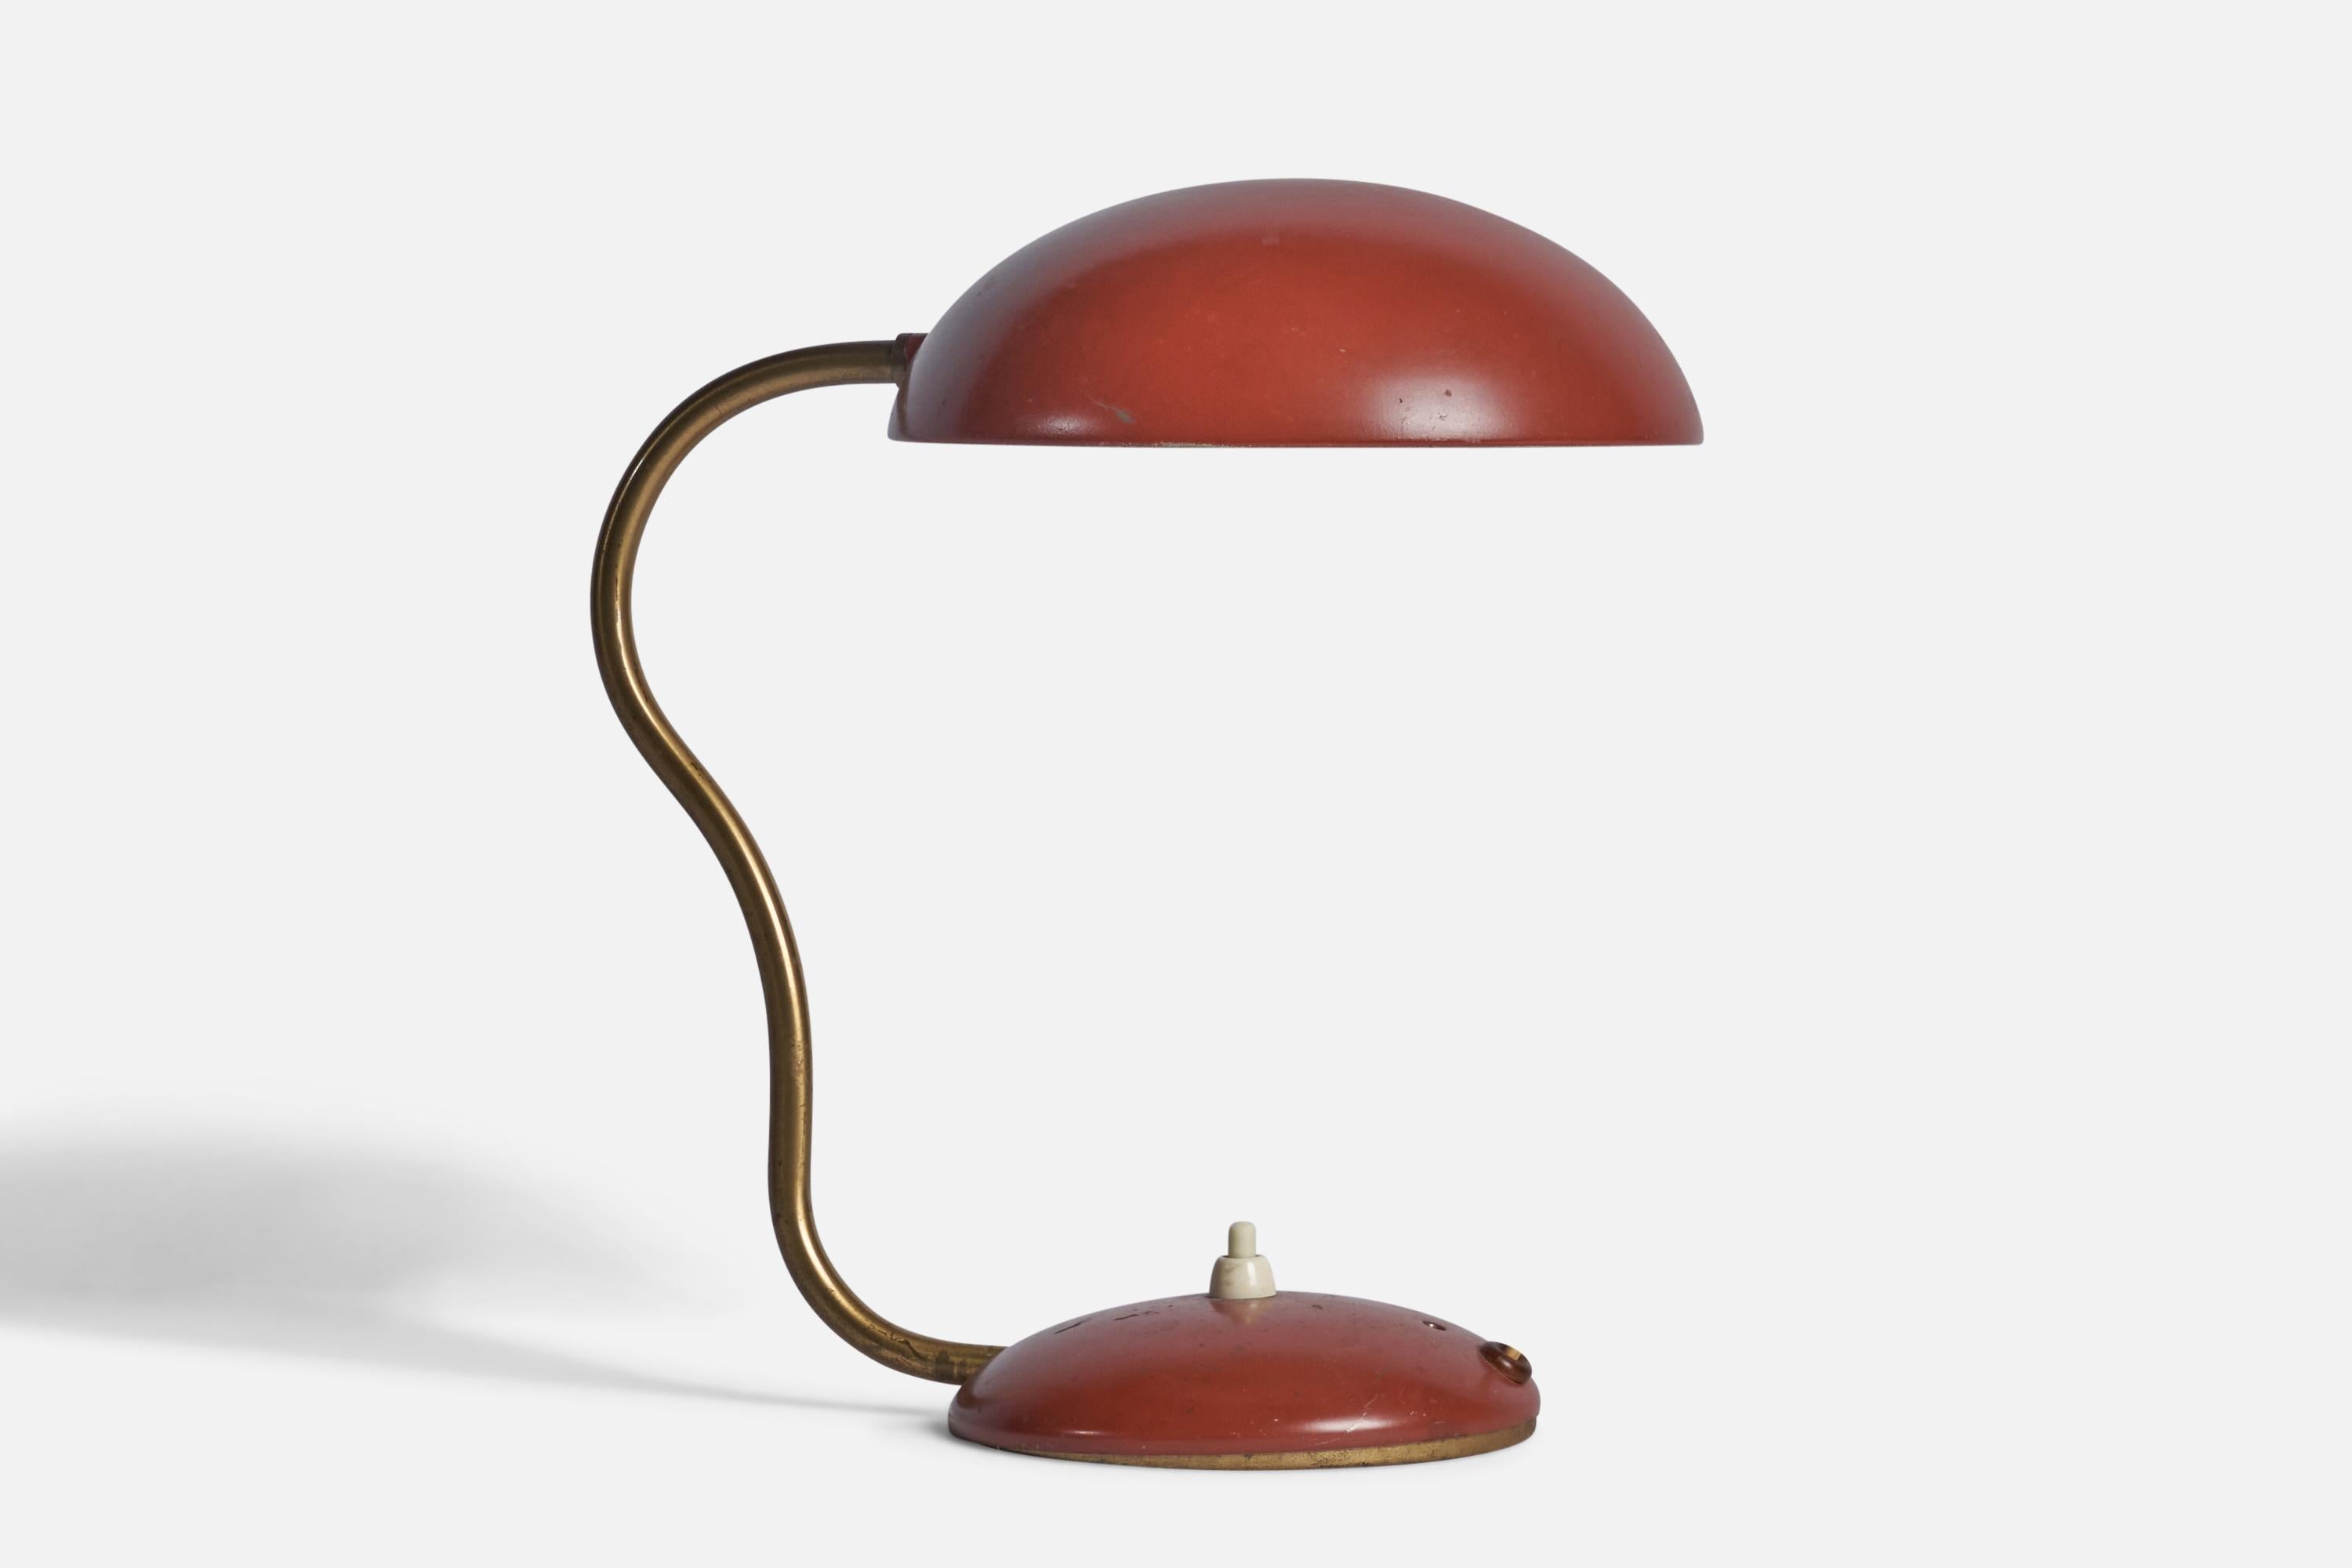 An adjustable brass and red-lacquered metal table lamp designed and produced in Sweden, 1940s.

Overall Dimensions (inches): 11” H x 7” W x 10” D
Bulb Specifications: E-26 Bulb
Number of Sockets: 1
All lighting will be converted for US usage. We are